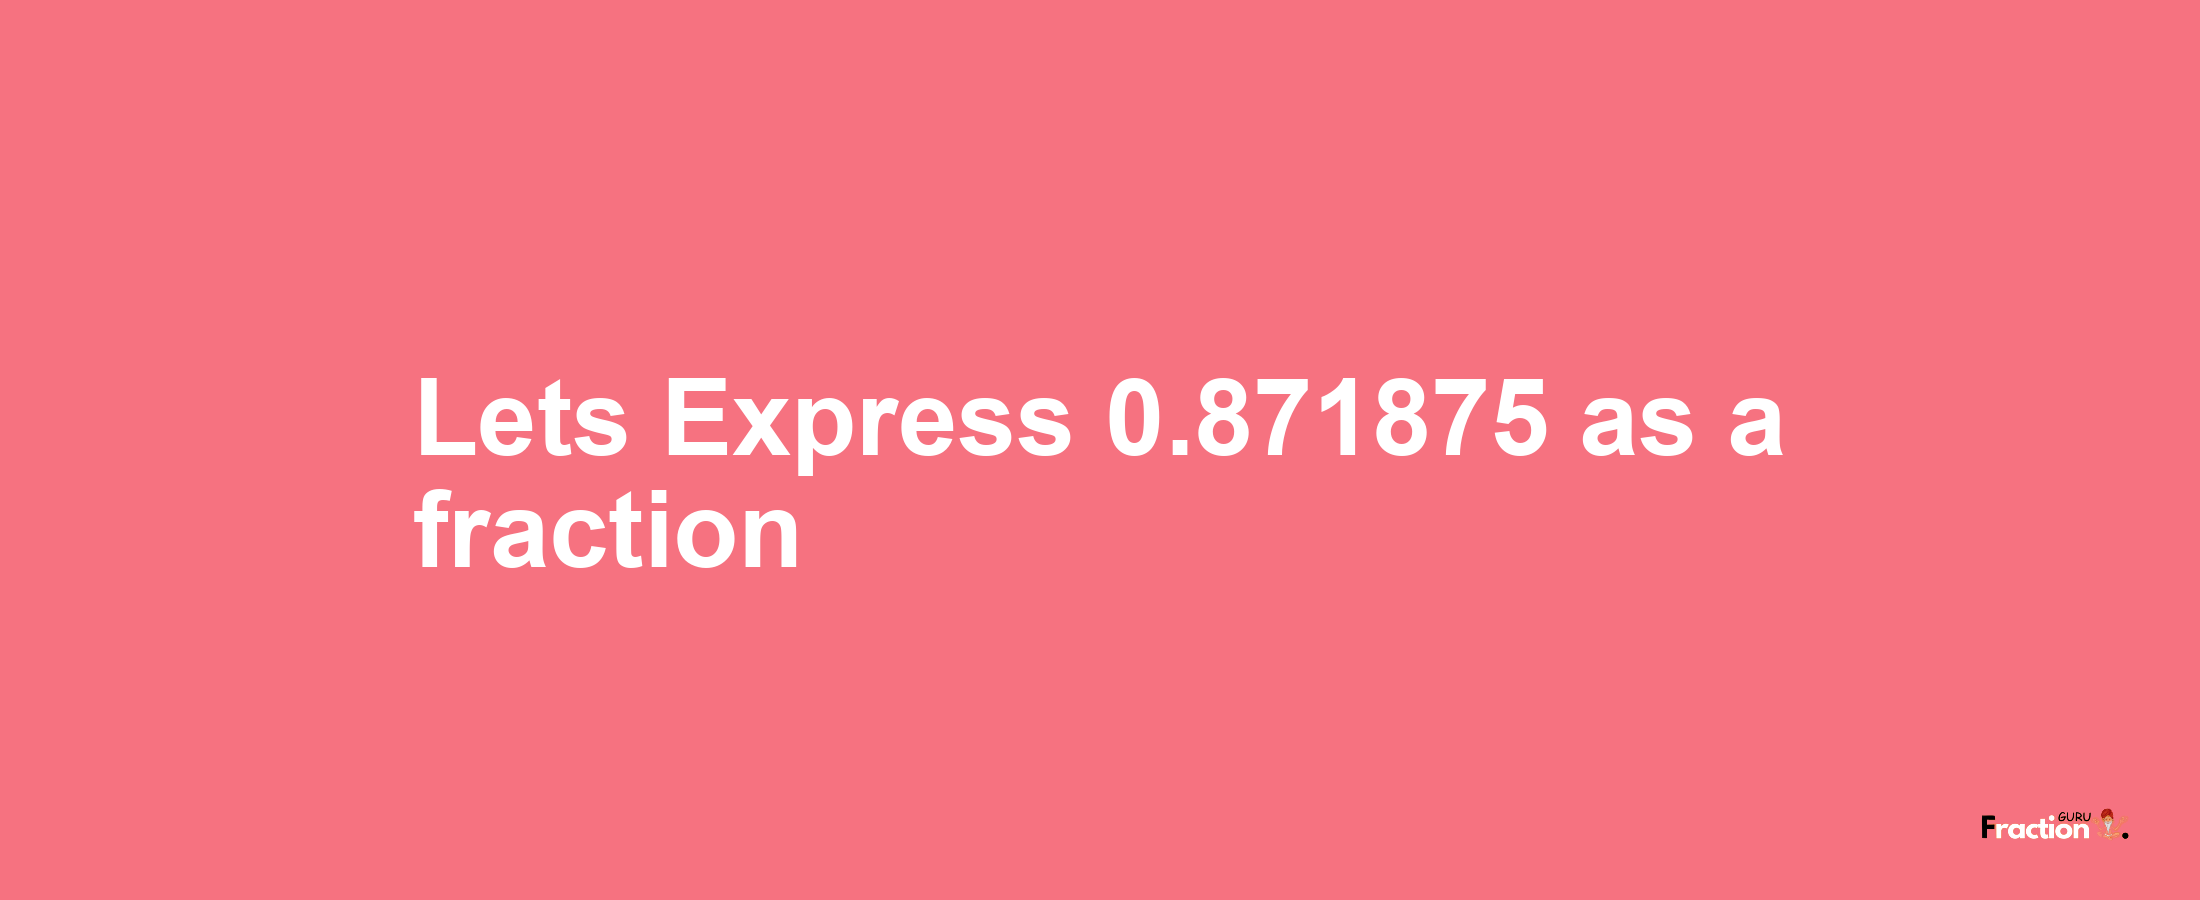 Lets Express 0.871875 as afraction